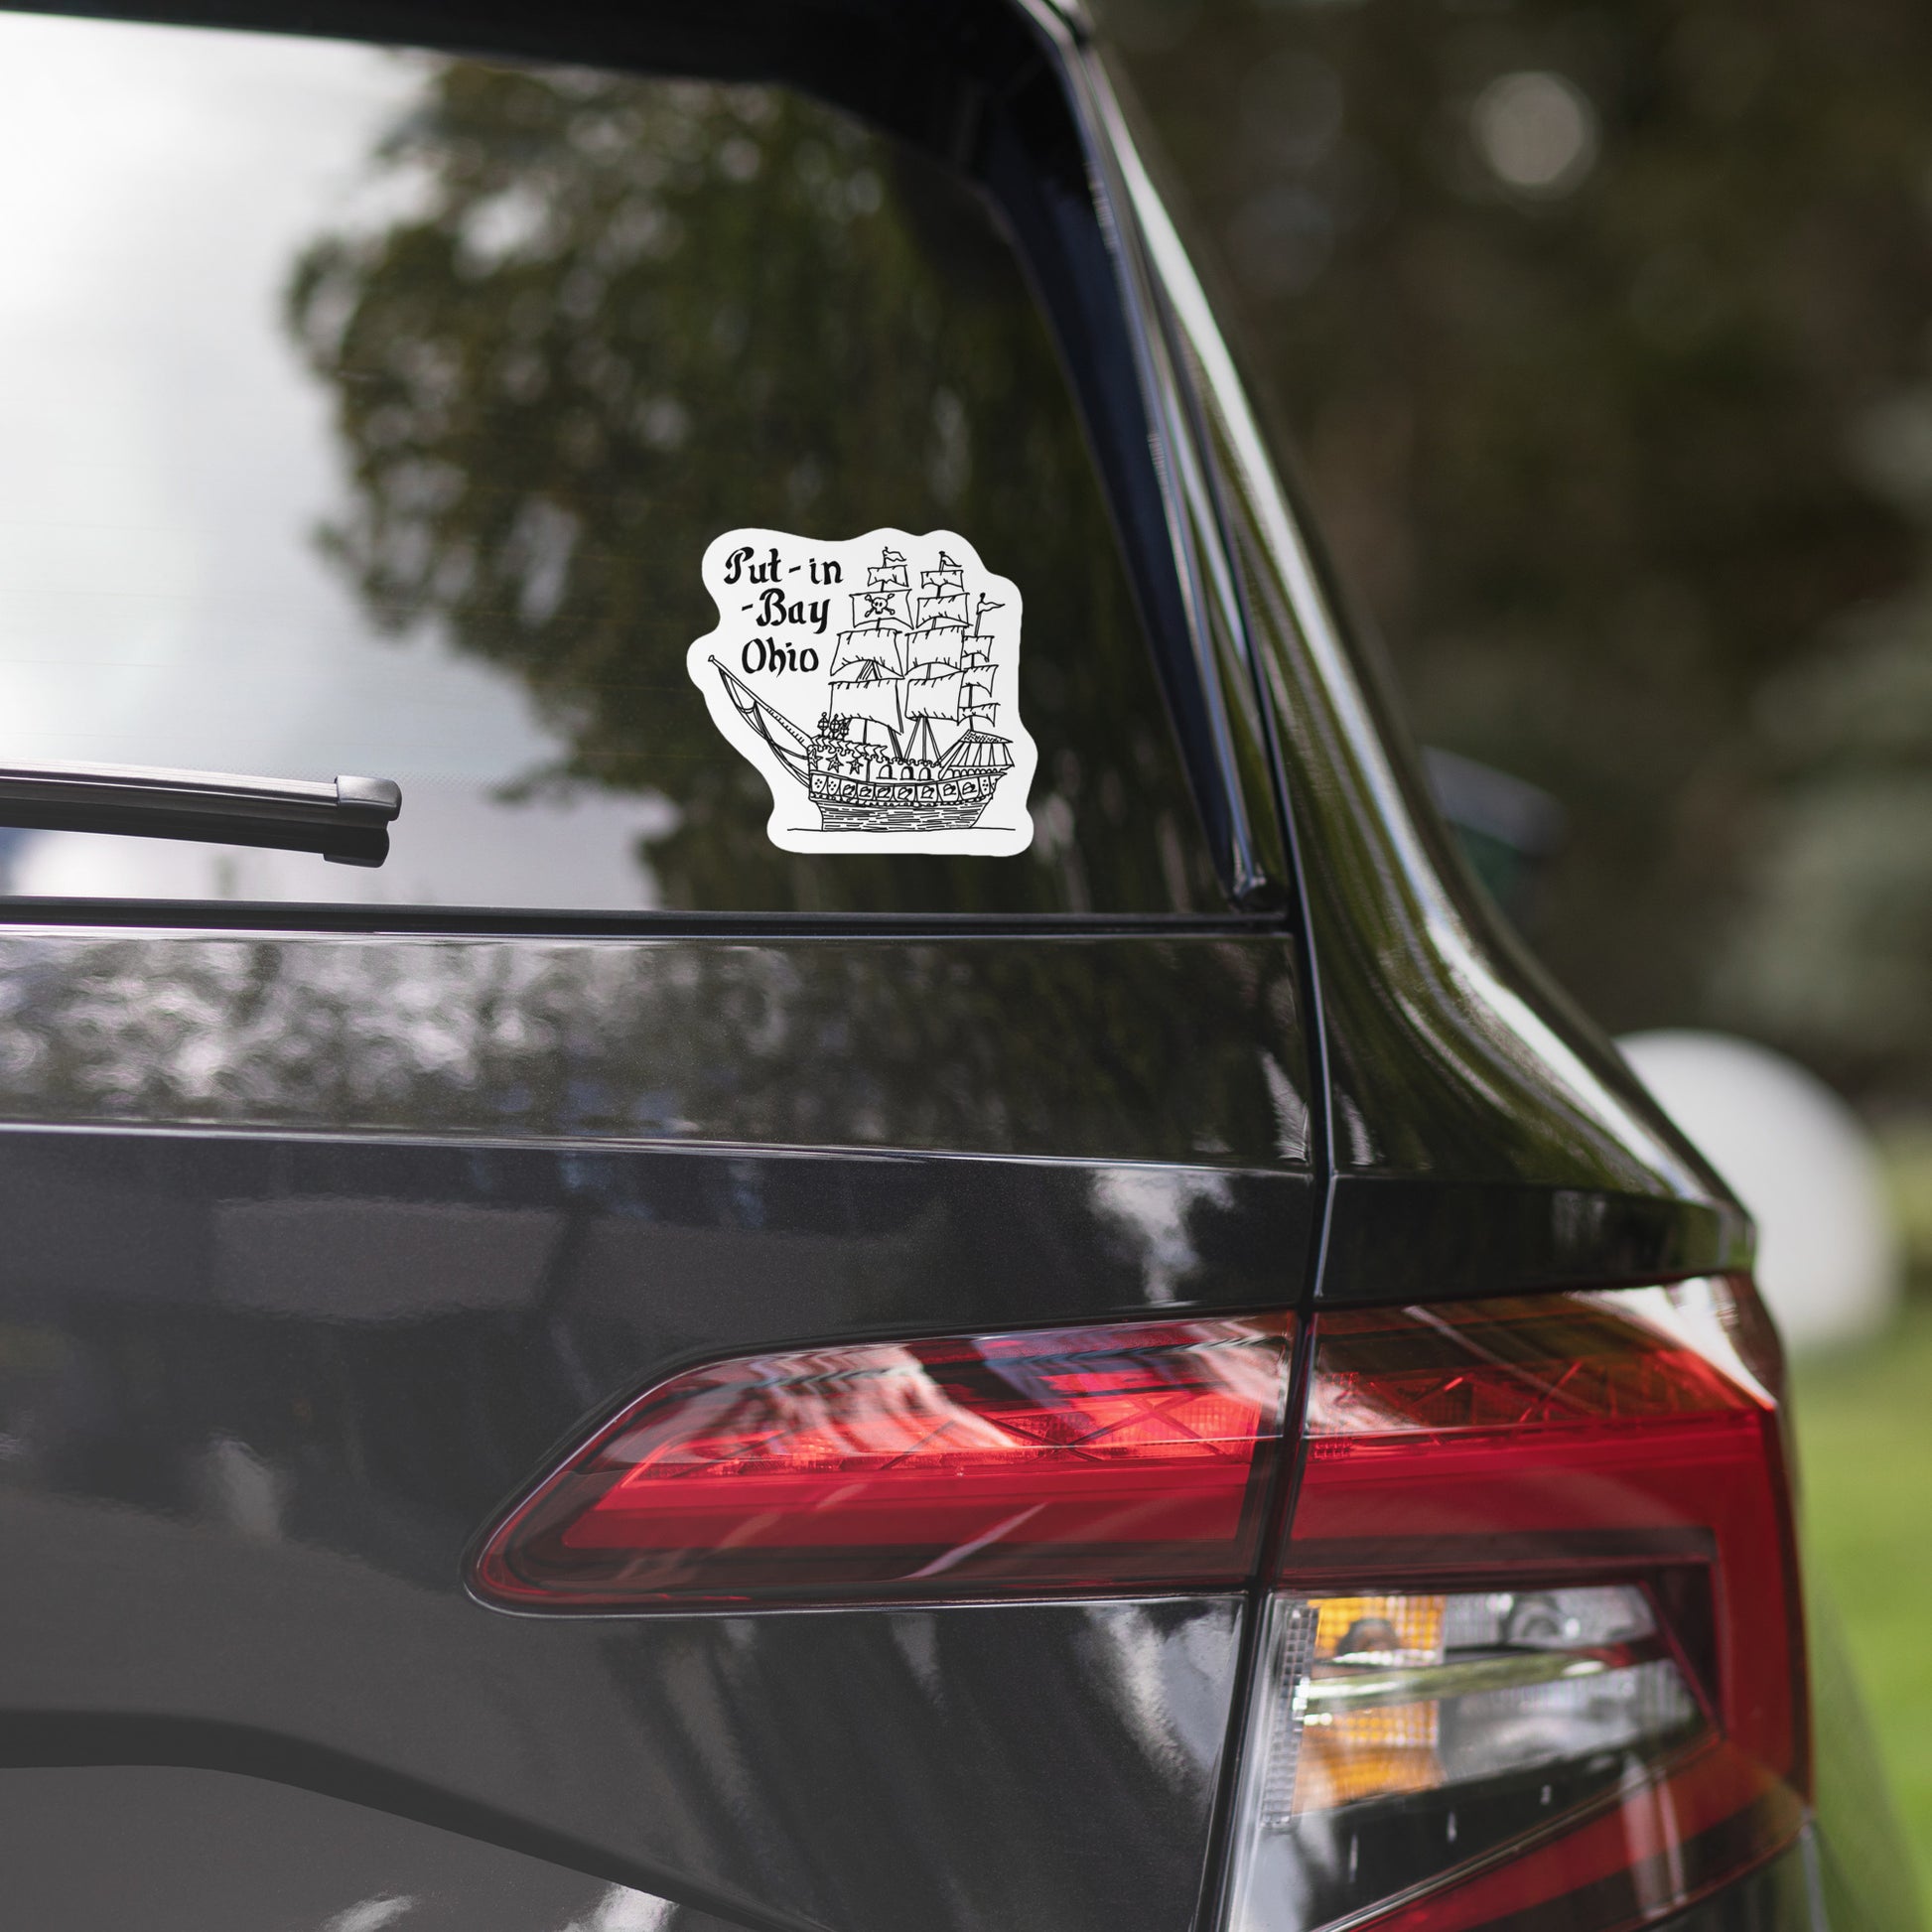 put in bay ohio 5.5 inch sticker displayed on rear window of vehicle